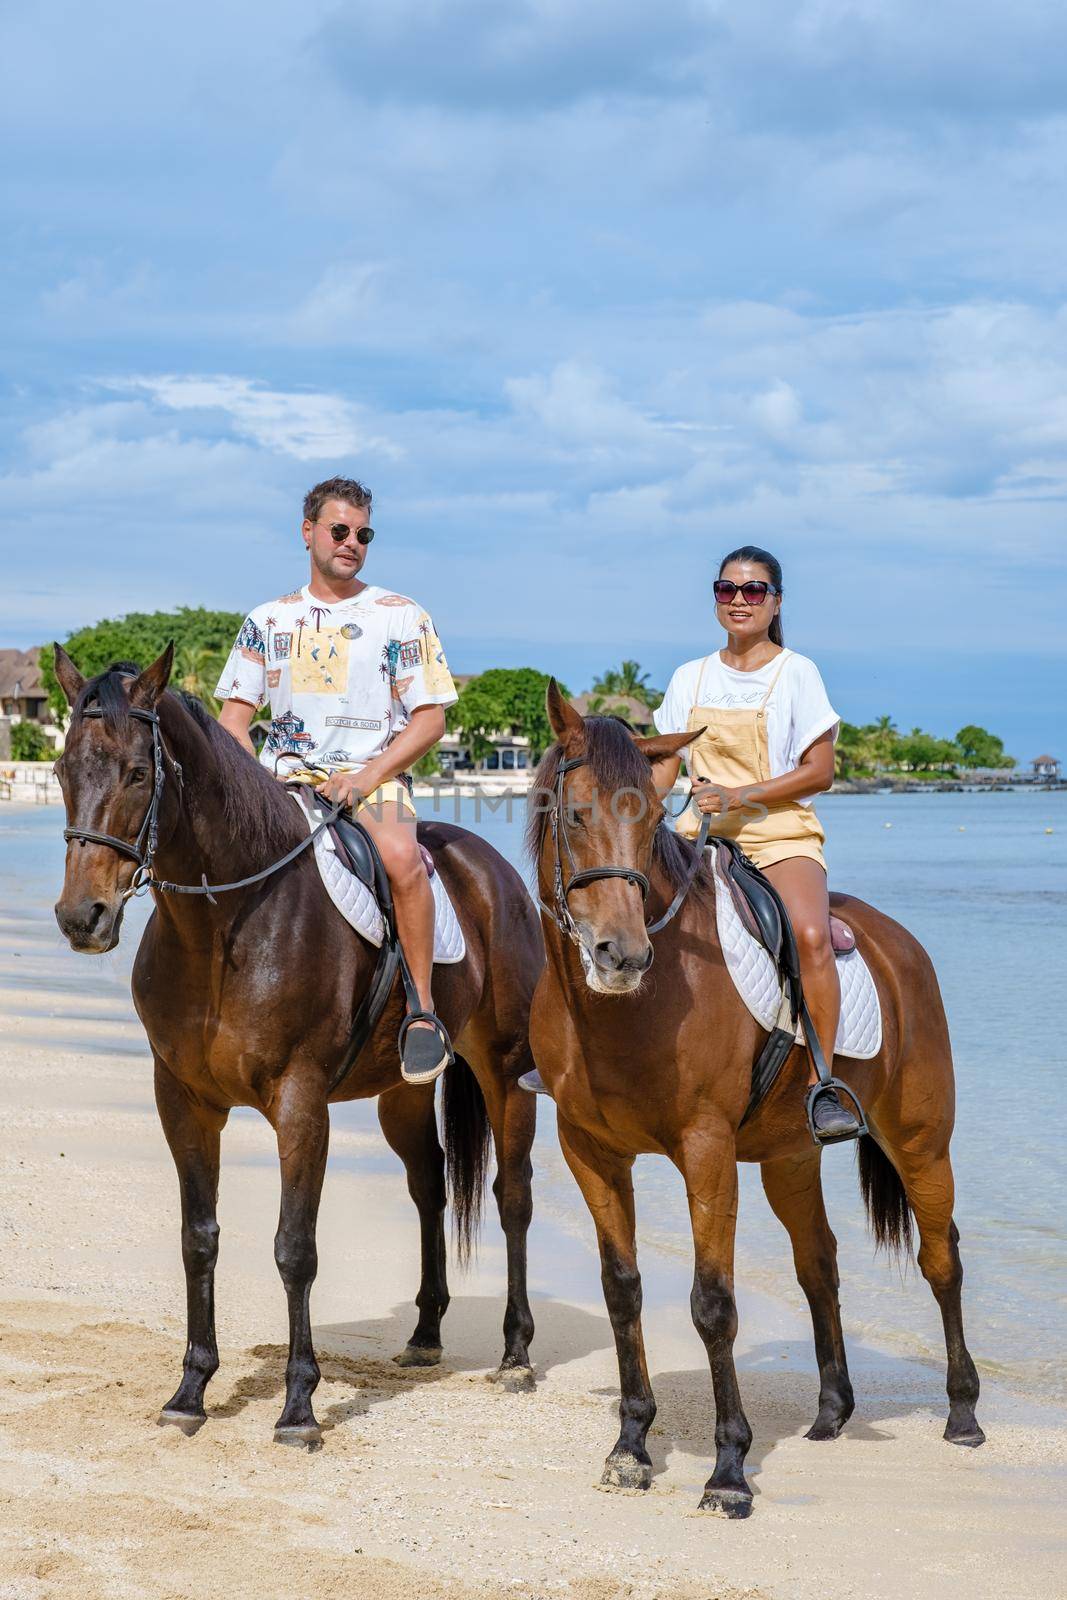 horse riding on the beach, man and woman on a horse on the beach during a luxury vacation in Mauritius.